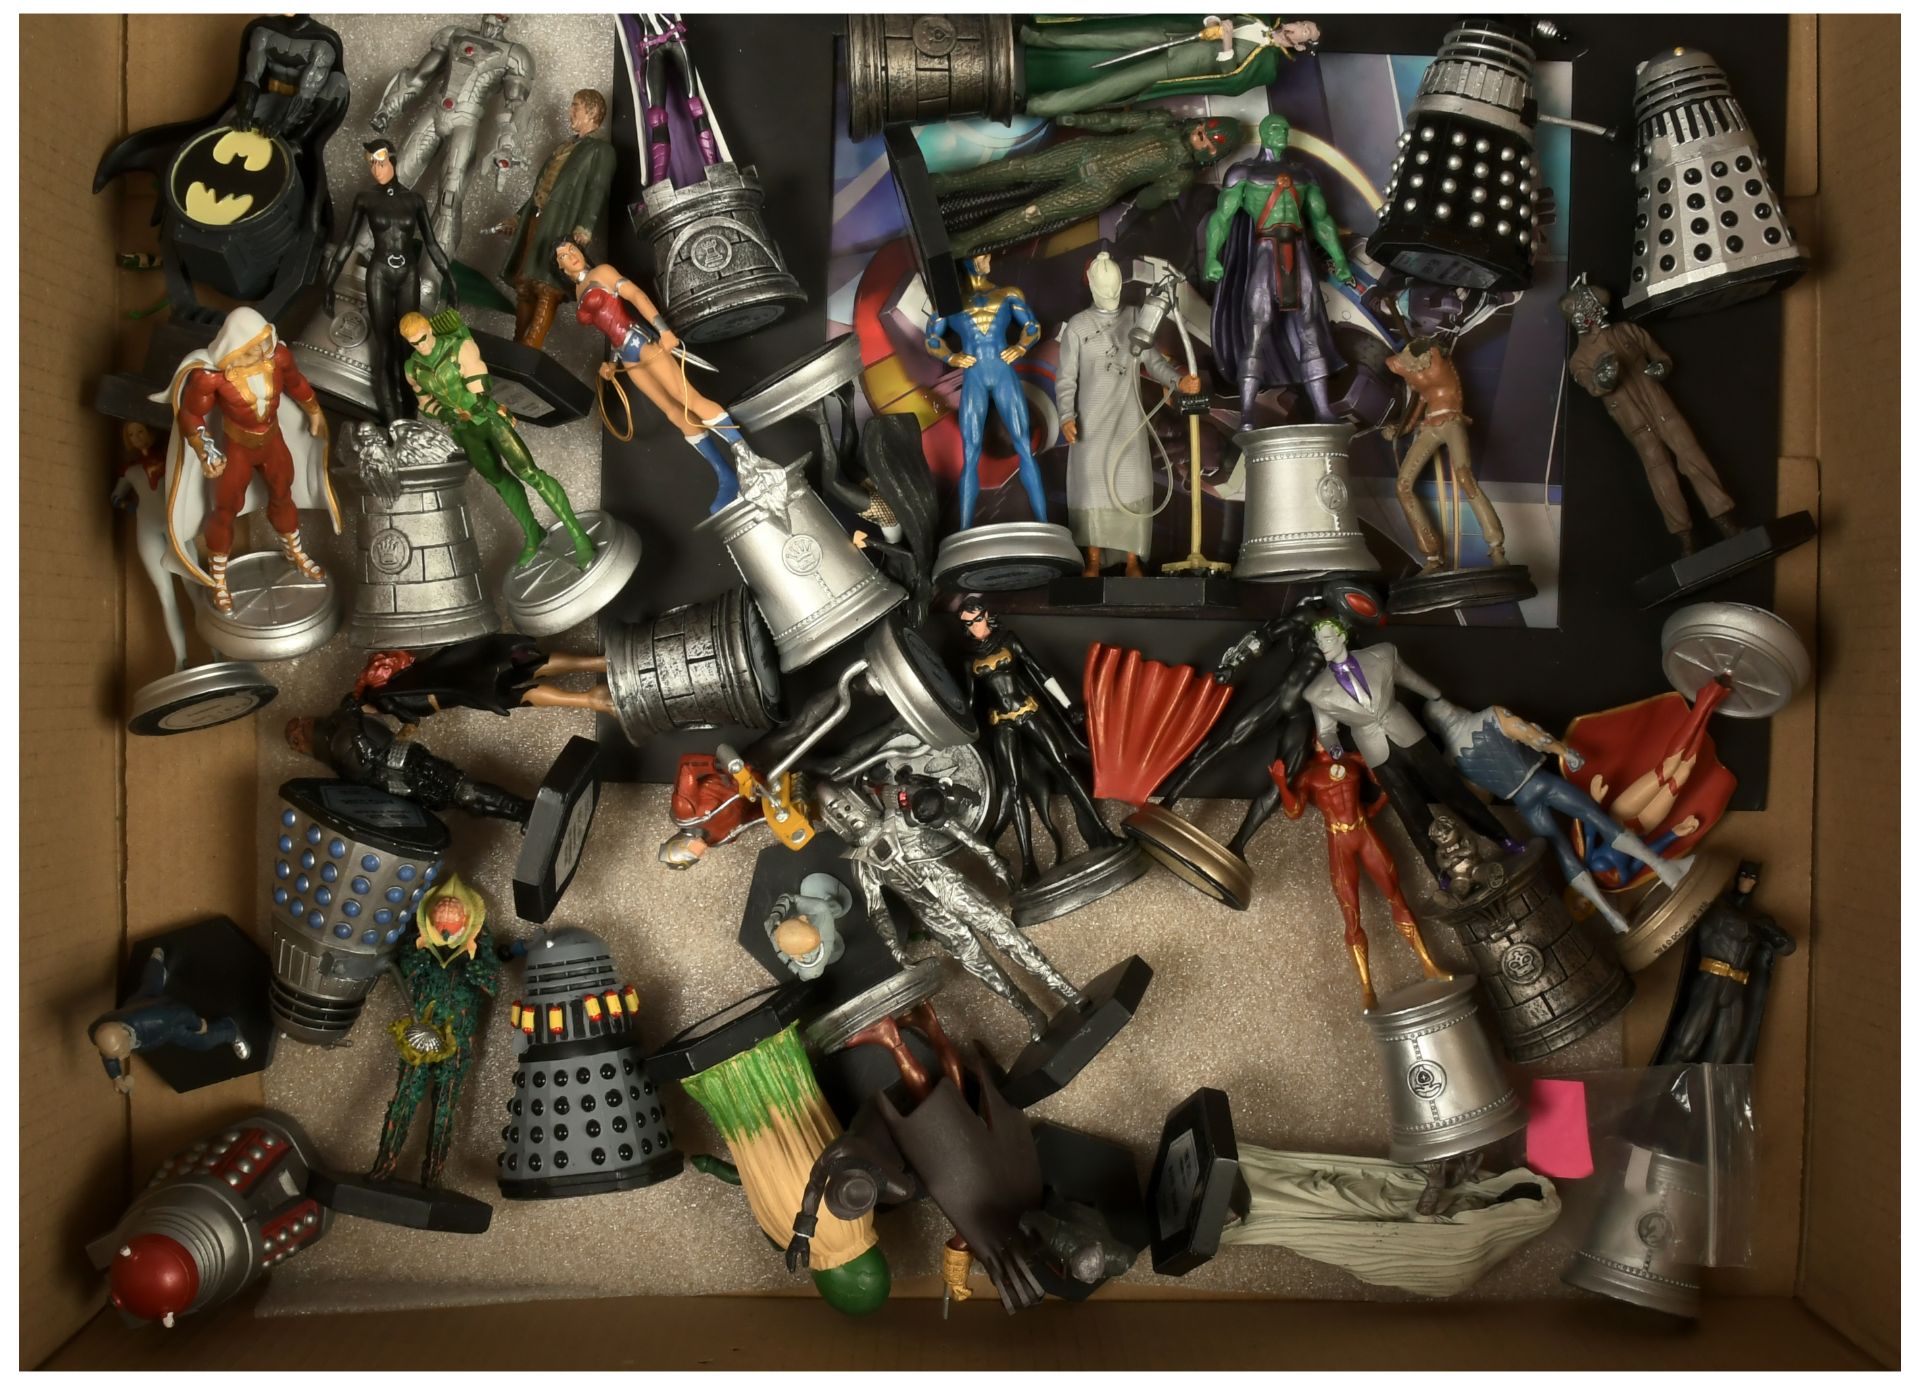 Quantity of loose figurines Includes DC and Doctor Who with others. - Image 2 of 2